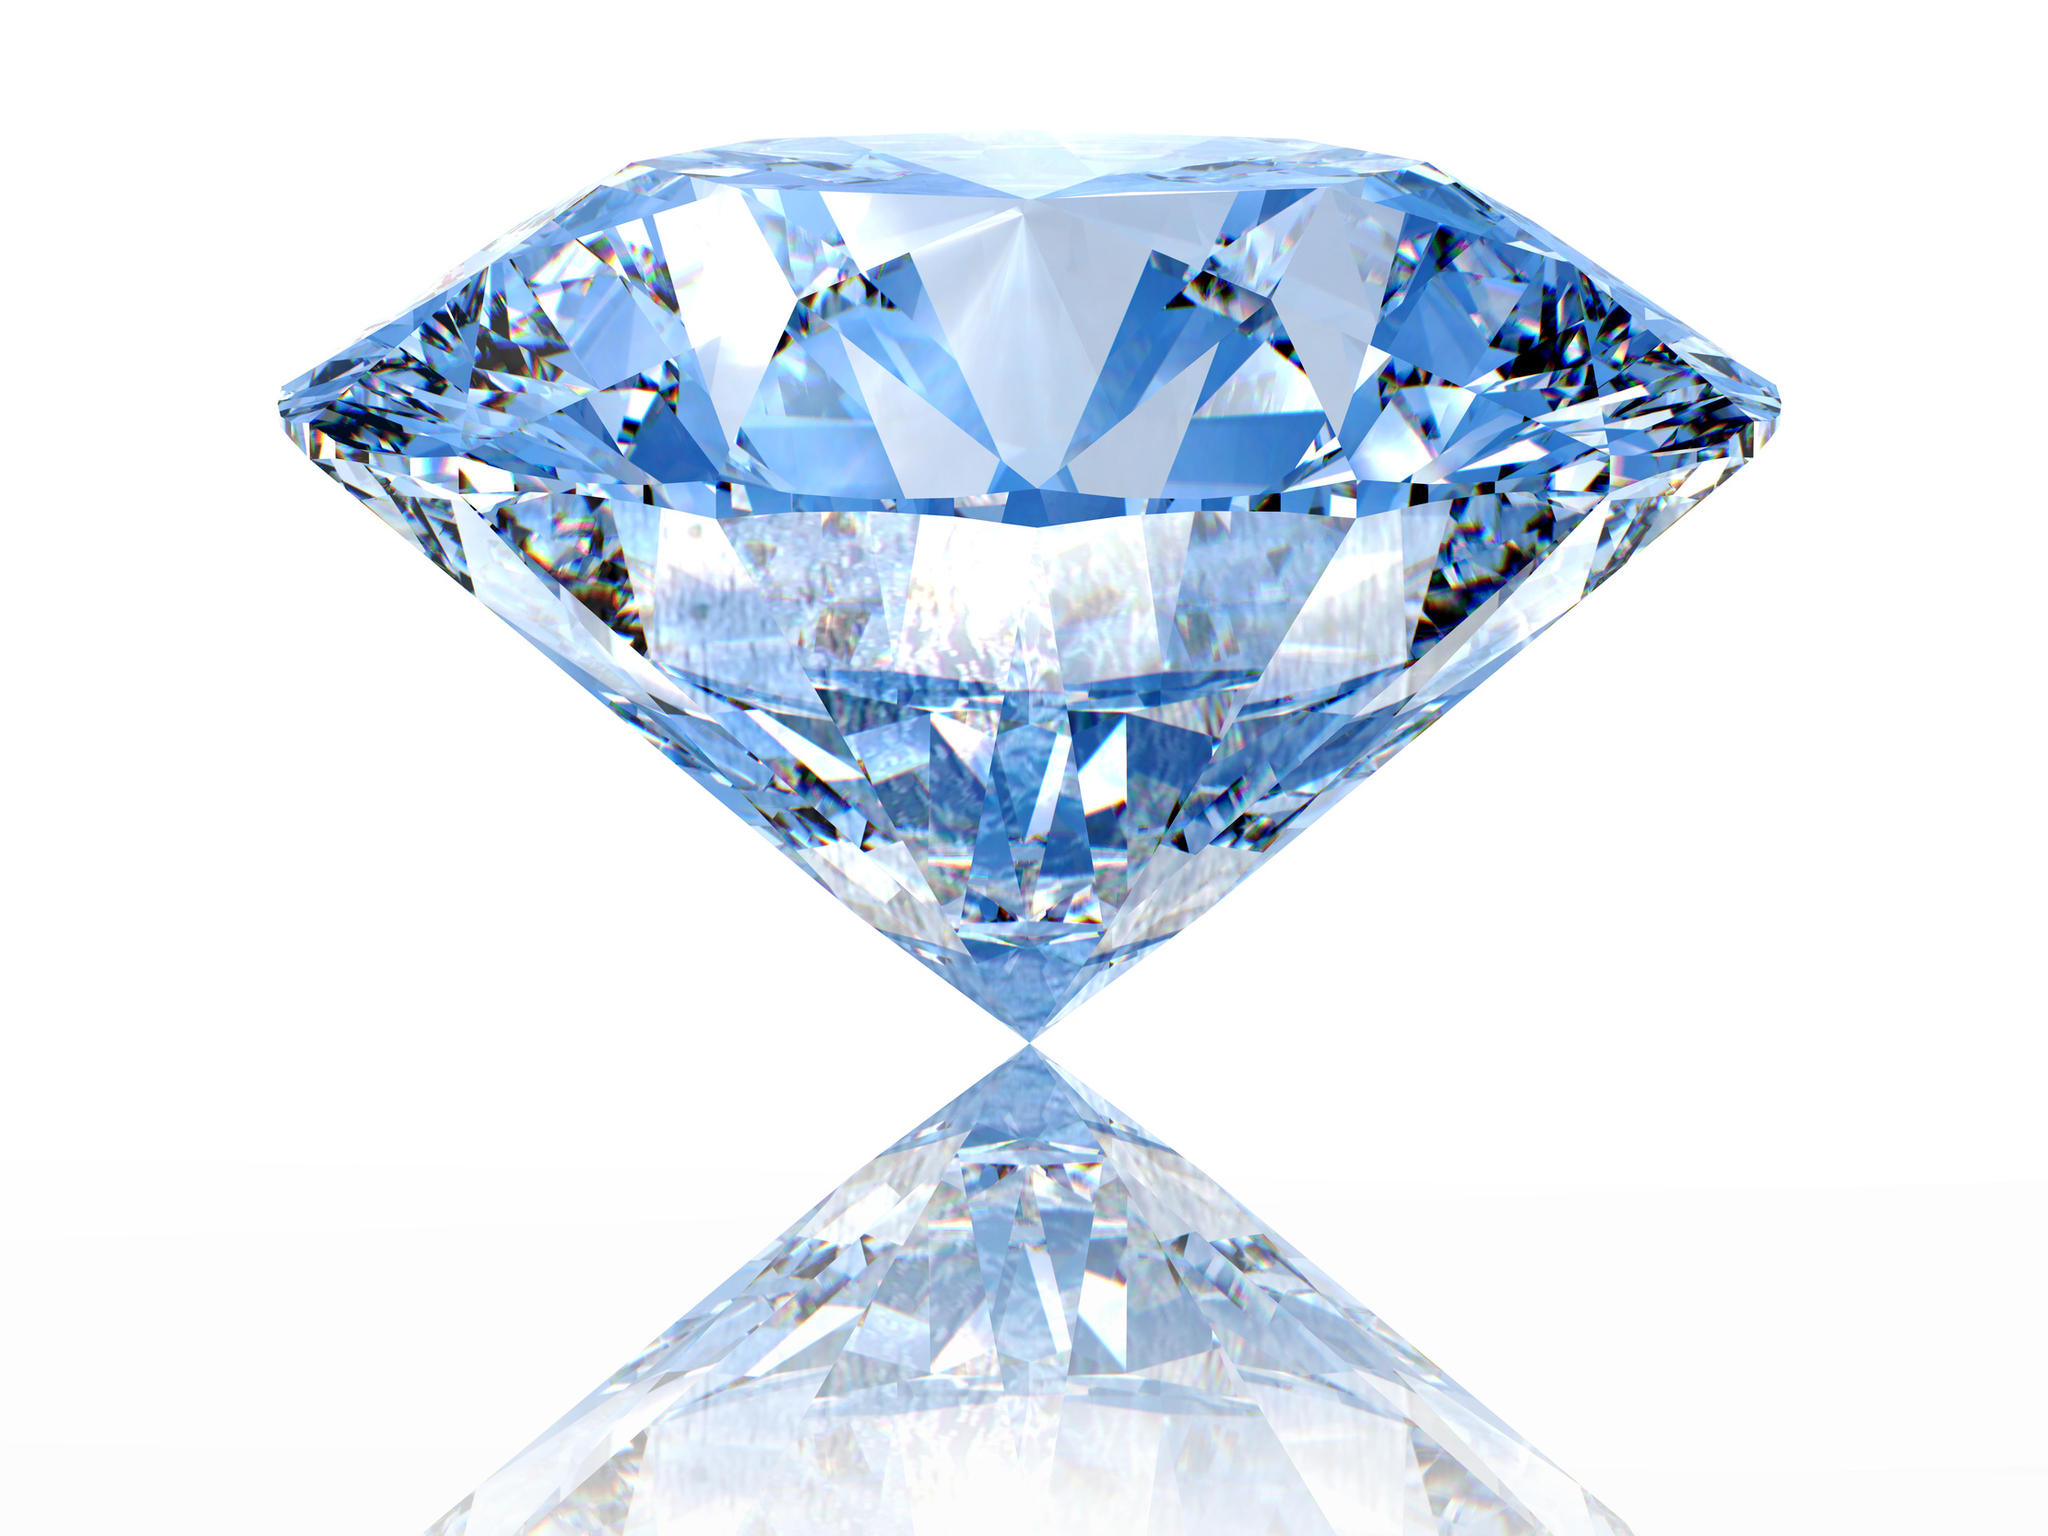 Blue Diamond On White Background With Reflection